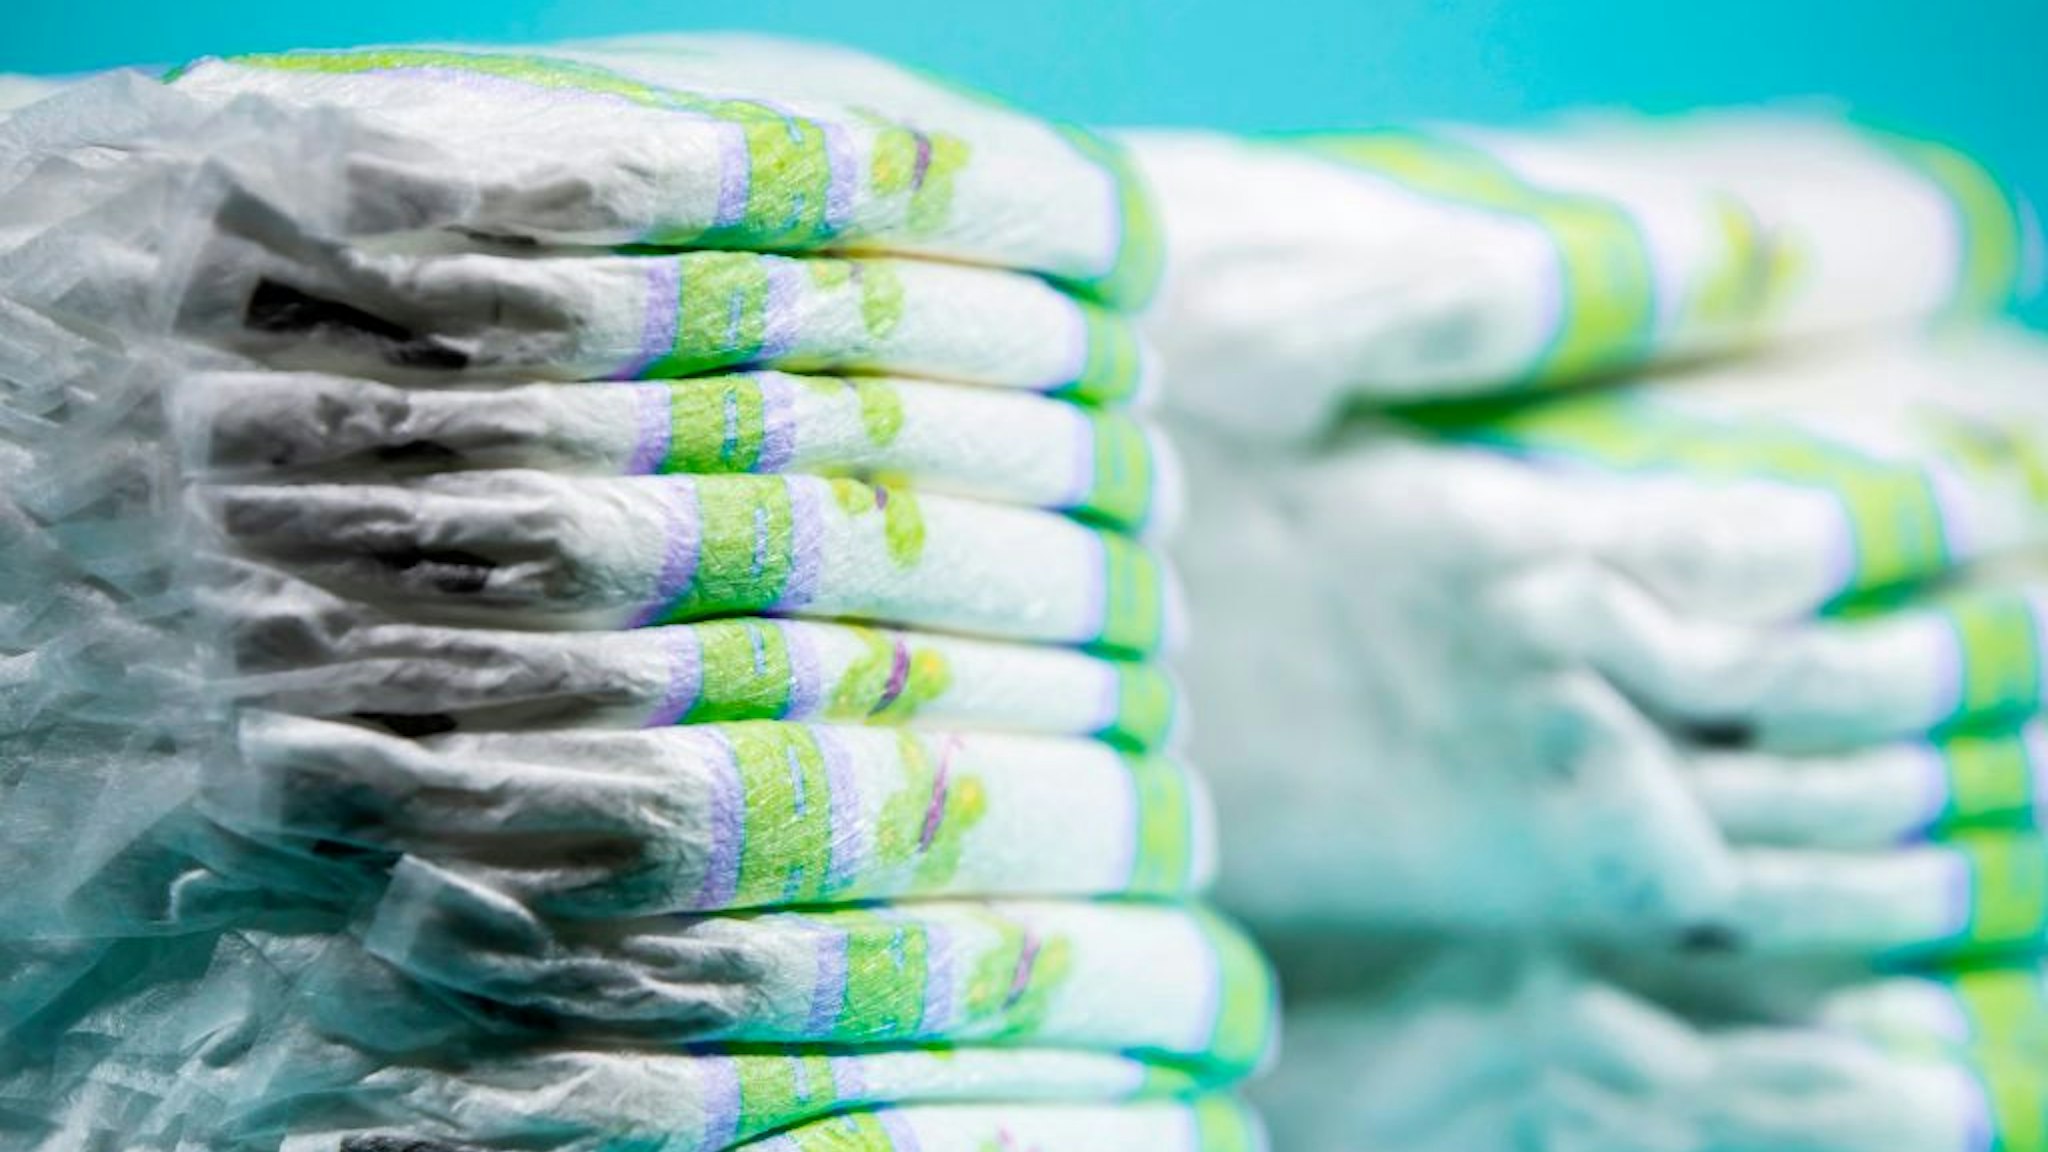 This photograph taken on August 23, 2018, shows a pile of nappies in a studio in Paris. - Eighteen months after an initial shocking survey by the magazine "60 million consumers" (60 Millions de consommateurs), the journal is again pointing to the alleged presence of potentially toxic residues in some baby nappies, but its findings are disputed by manufacturers. Twelve references were tested by the National Consumer Institute (INC) for the September issue of the magazine. For half, the tests revealed the presence of undesirable substances "in very small quantities". (Photo by JOEL SAGET / AFP) (Photo credit should read JOEL SAGET/AFP via Getty Images)